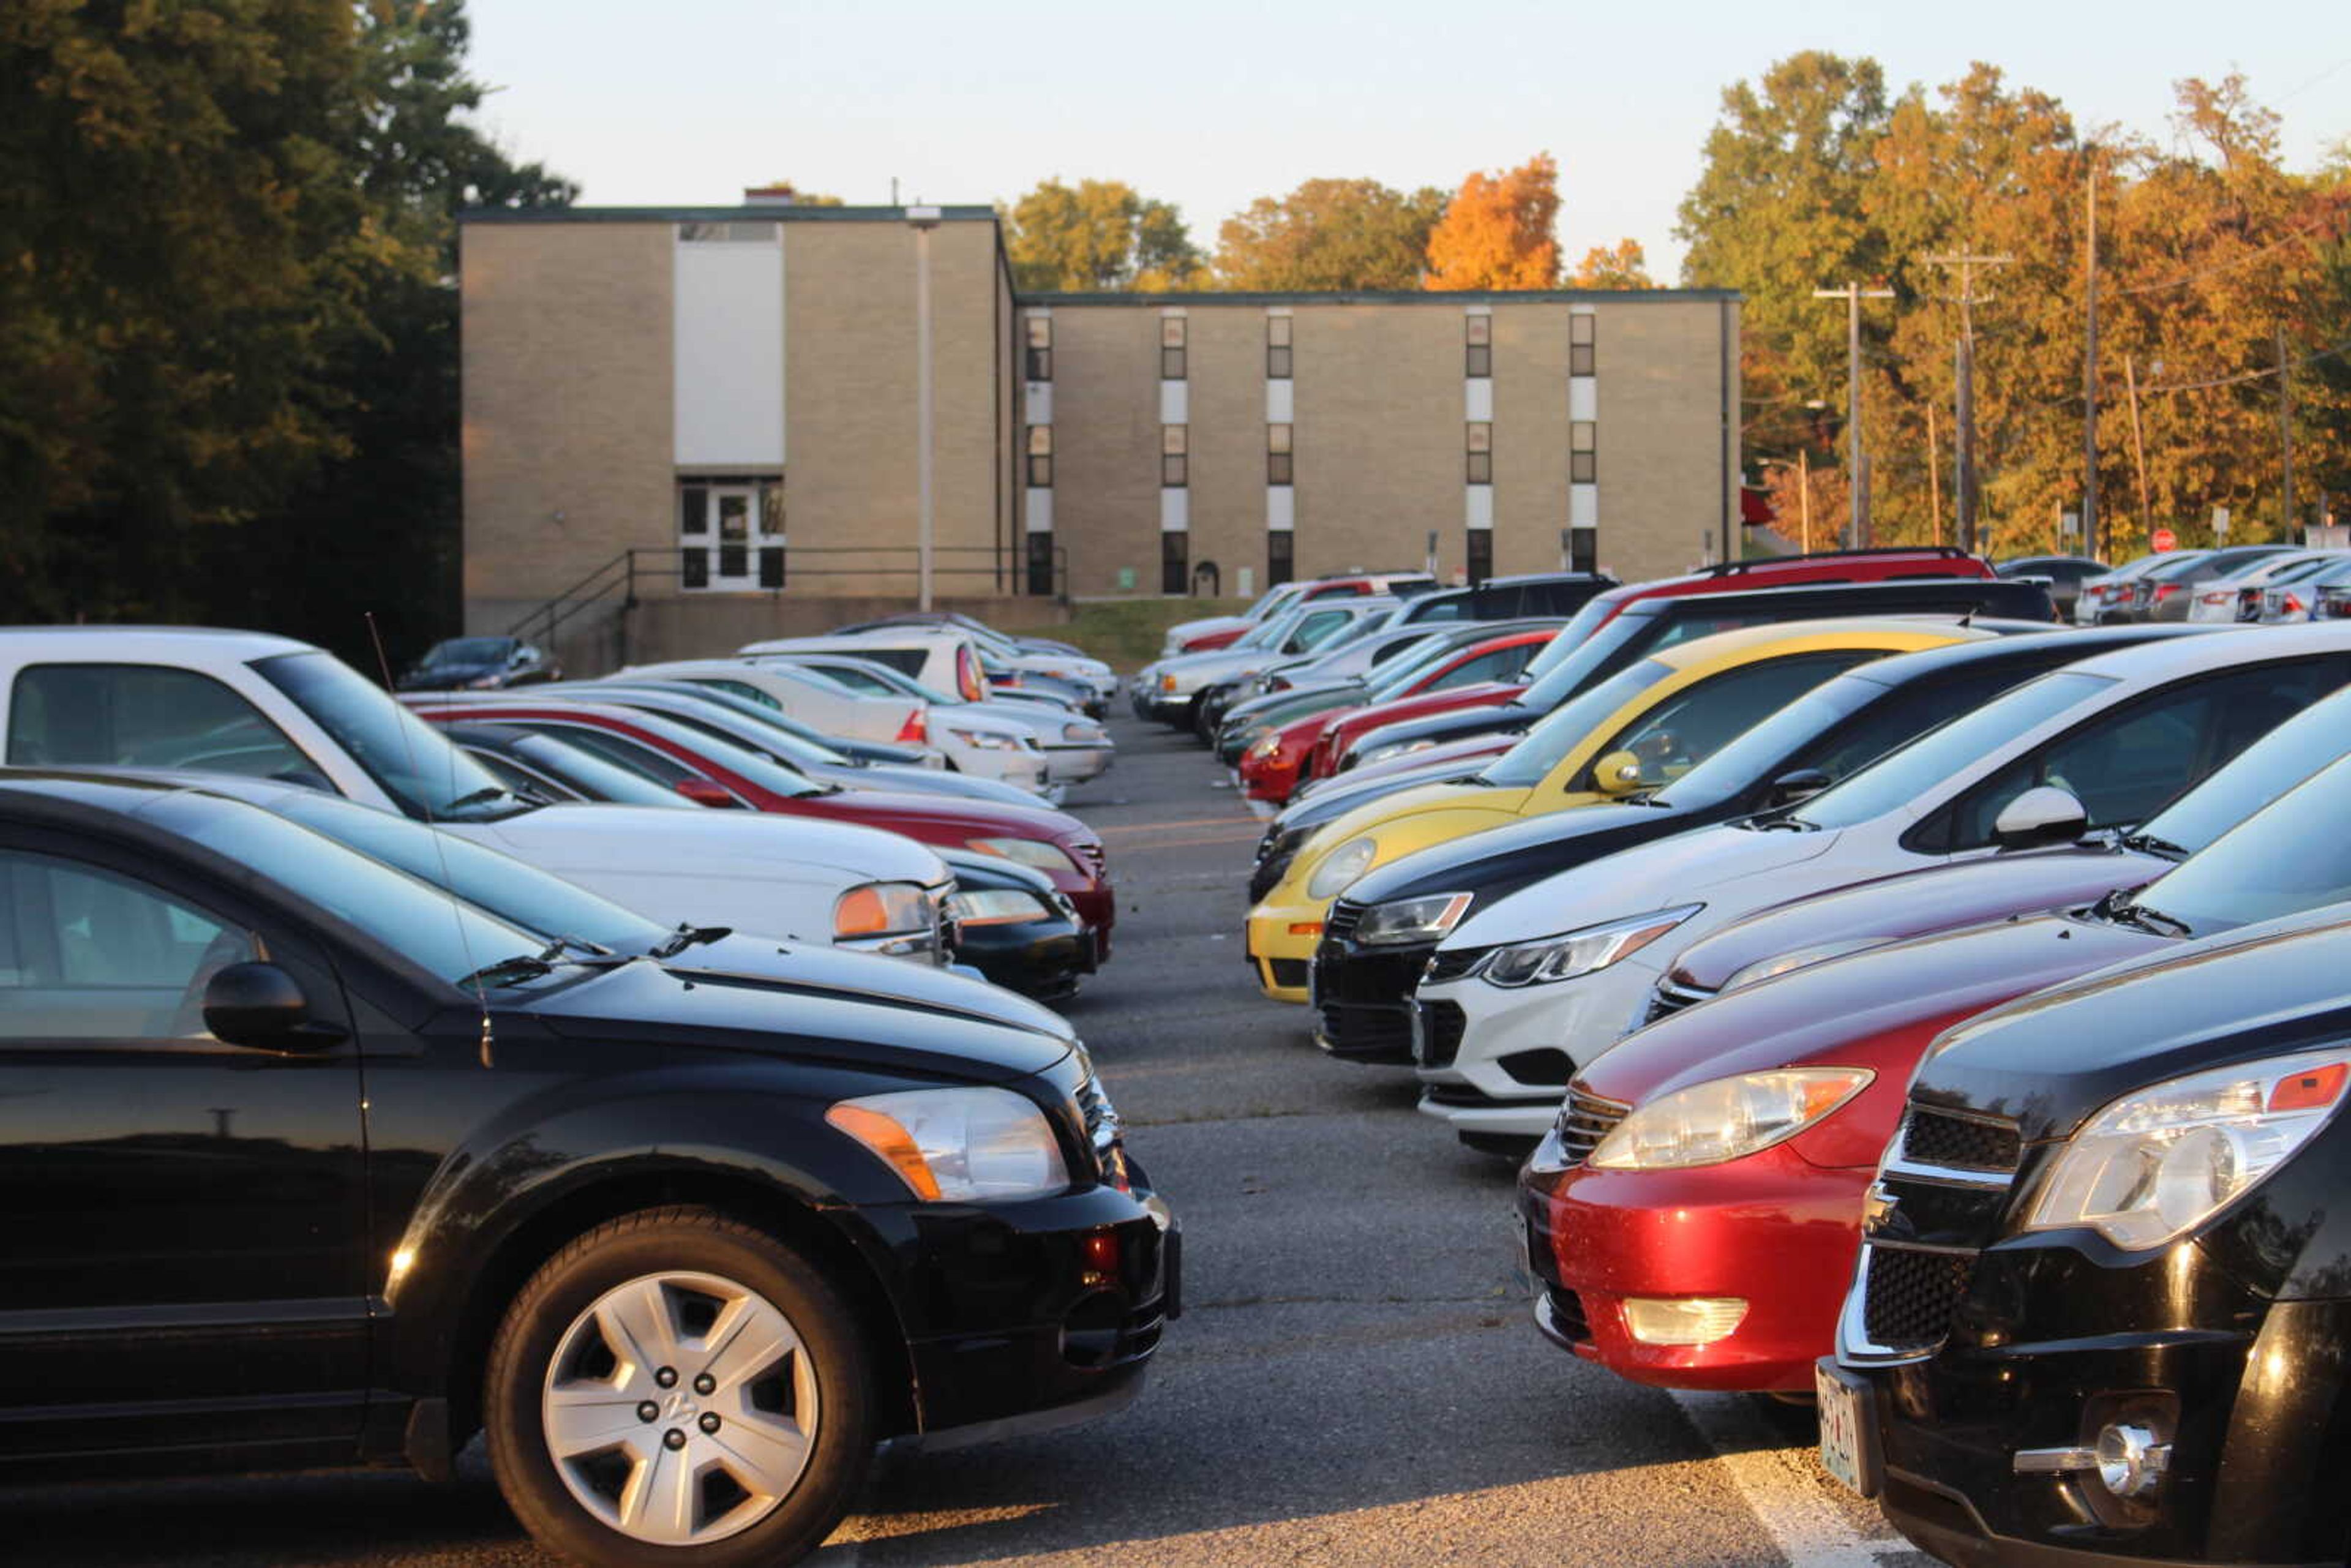 At least 17 cars were damaged over the weekend Oct. 26 and 27, while parked in preferred lot B 1-21 across from Vandiver Hall.